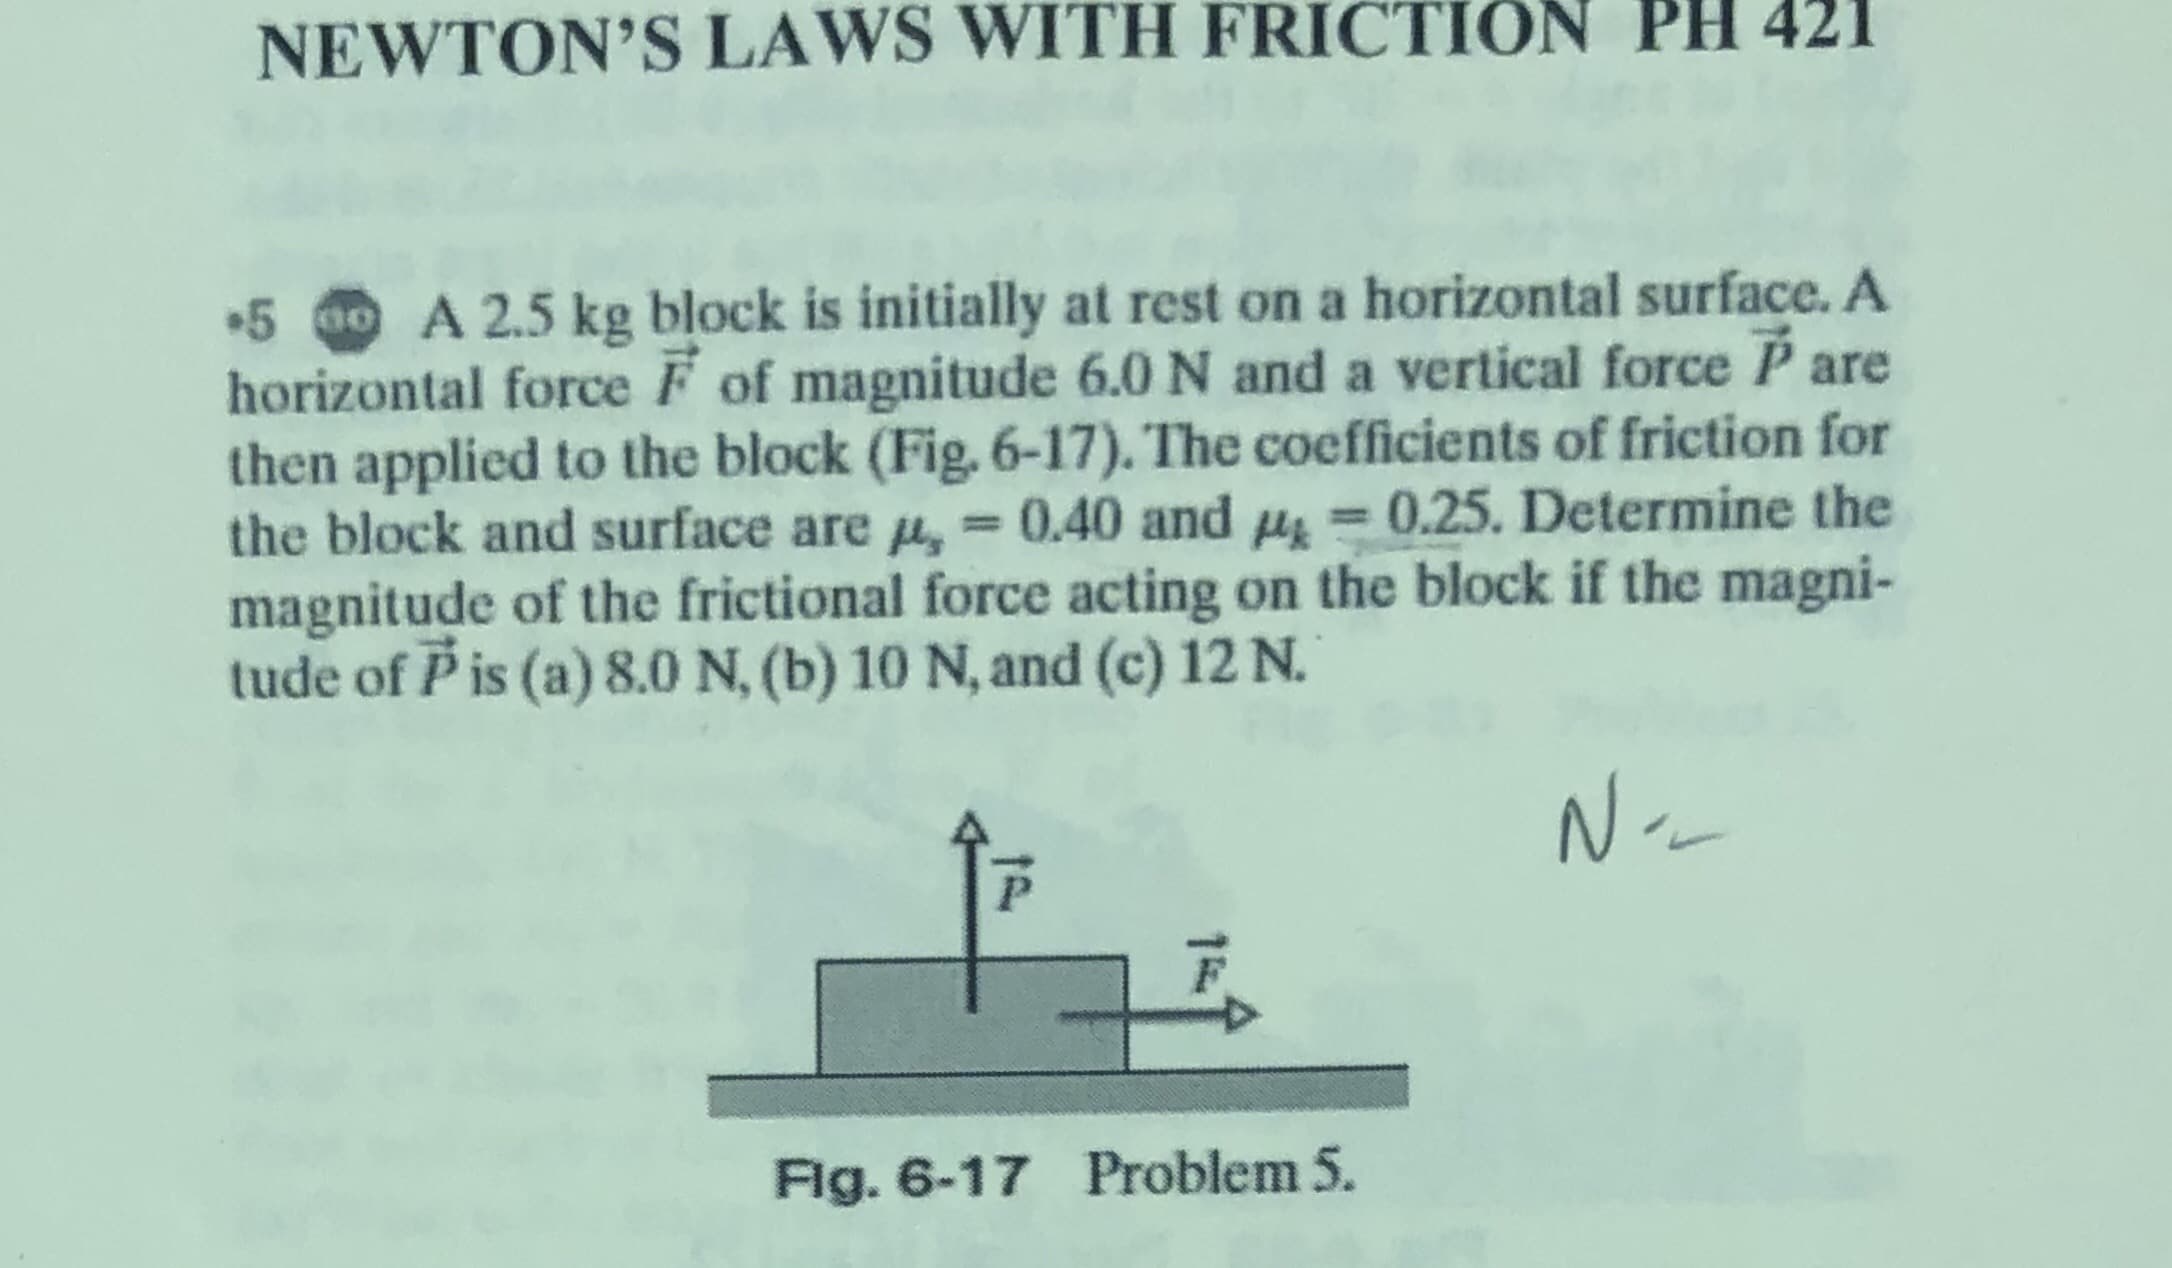 NEWTON'S LAWS WITH FRICTION PH 421
5 0 A 2.5 kg block is initially at rest on a horizontal surface. A
horizontal force F of magnitude 6.0 N and a vertical force P are
then applied to the block (Fig. 6-17). The coefficients of friction for
the block and surface are M,
magnitude of the frictional force acting on the block if the magni-
tude of P is (a) 8.0 N, (b) 10 N, and (c) 12 N.
= 0.40 and H = 0.25. Determine the
%3D
N.
F.
Flg. 6-17 Problem 5.
